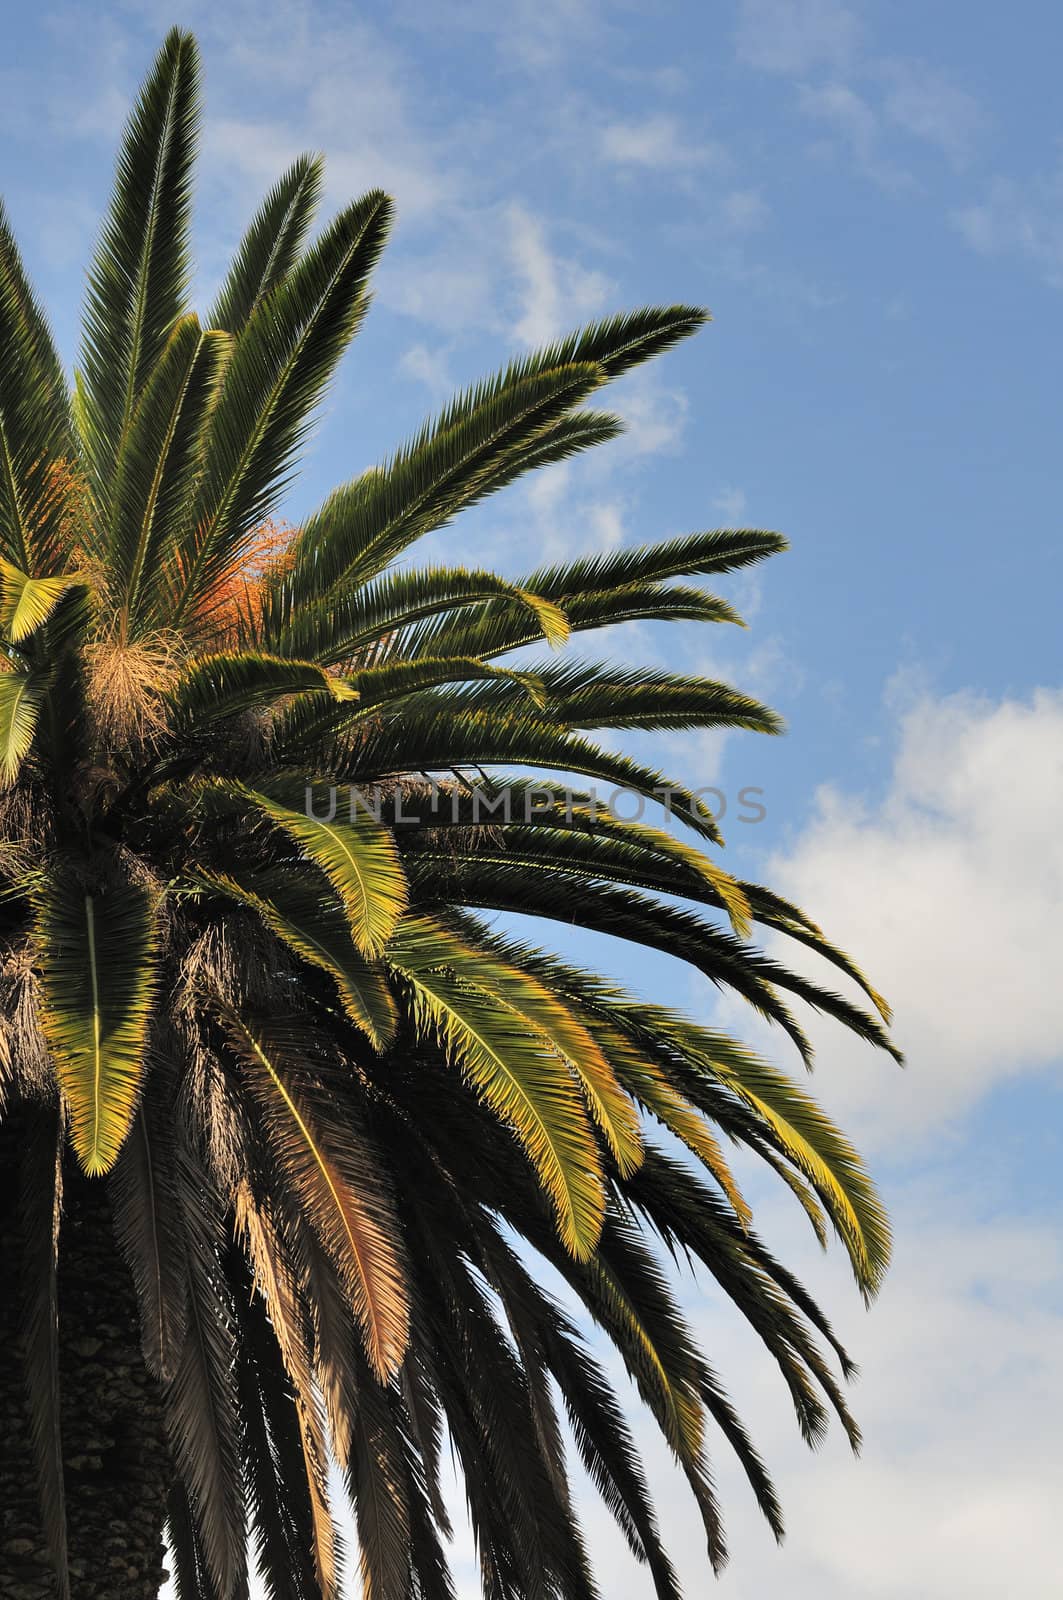 Canary Island Date Palm (Phoenix canariensis) against a blue sky with some clouds